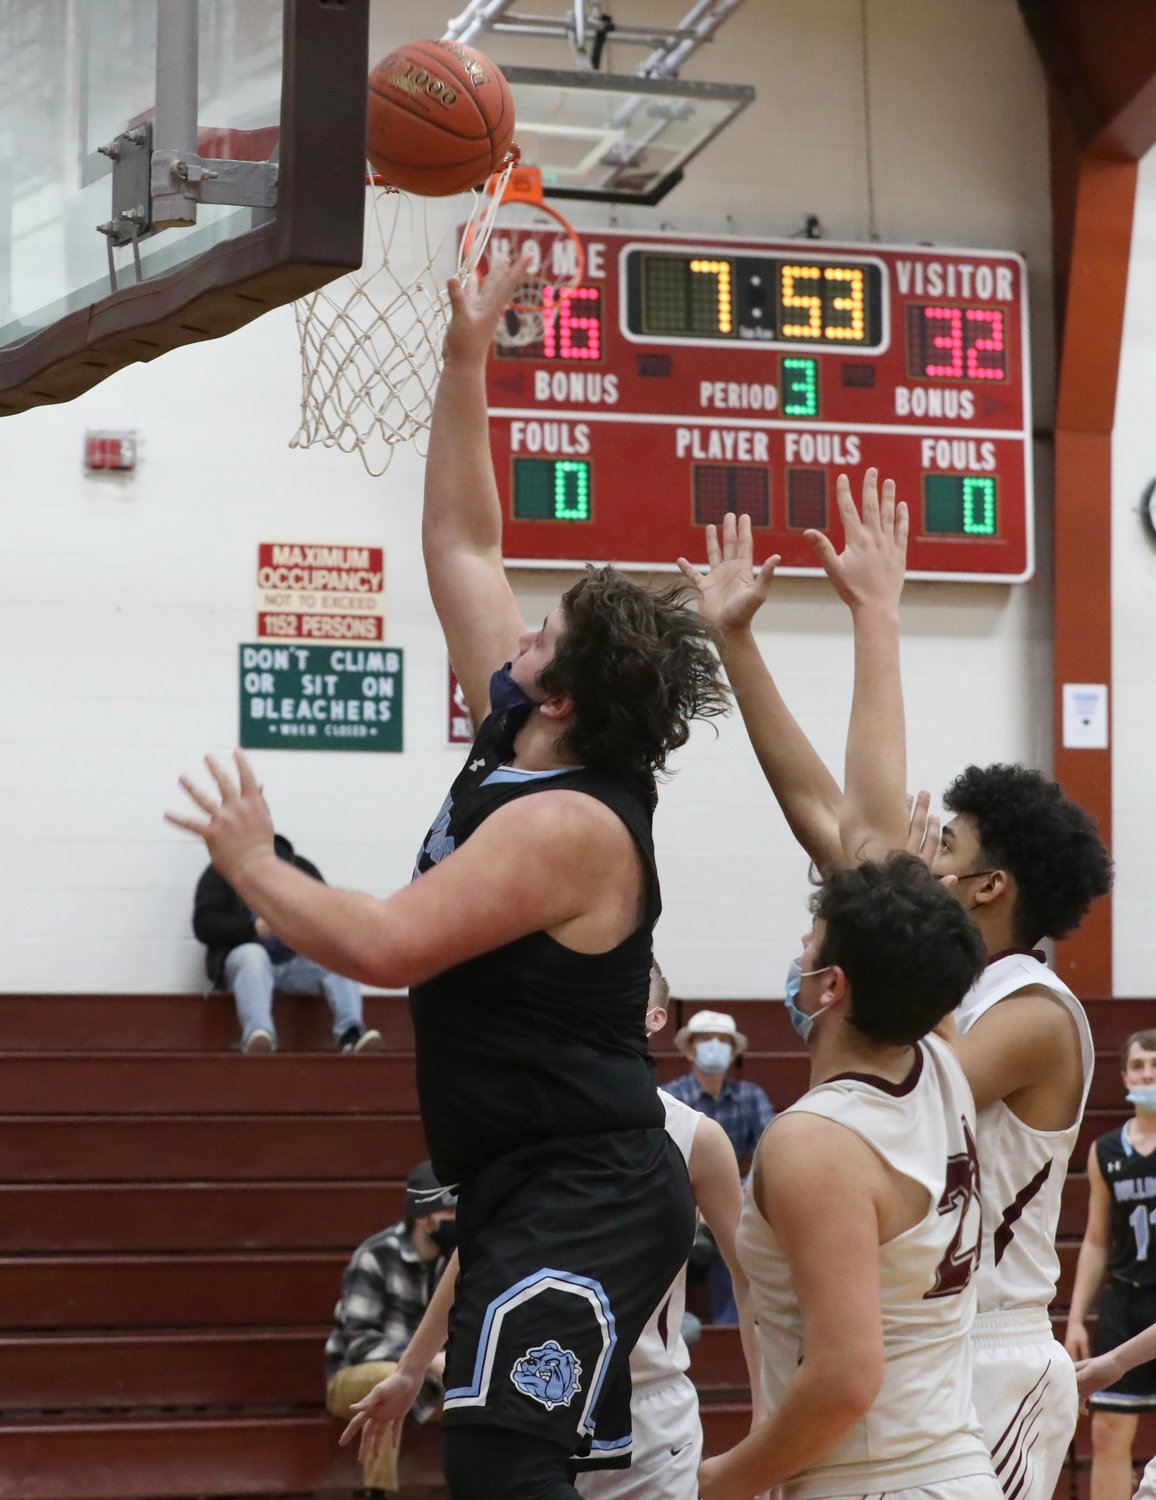 Sullivan West’s Chris Campanelli uses his size disparity to score two of his 11 points in this third quarter show of strength.